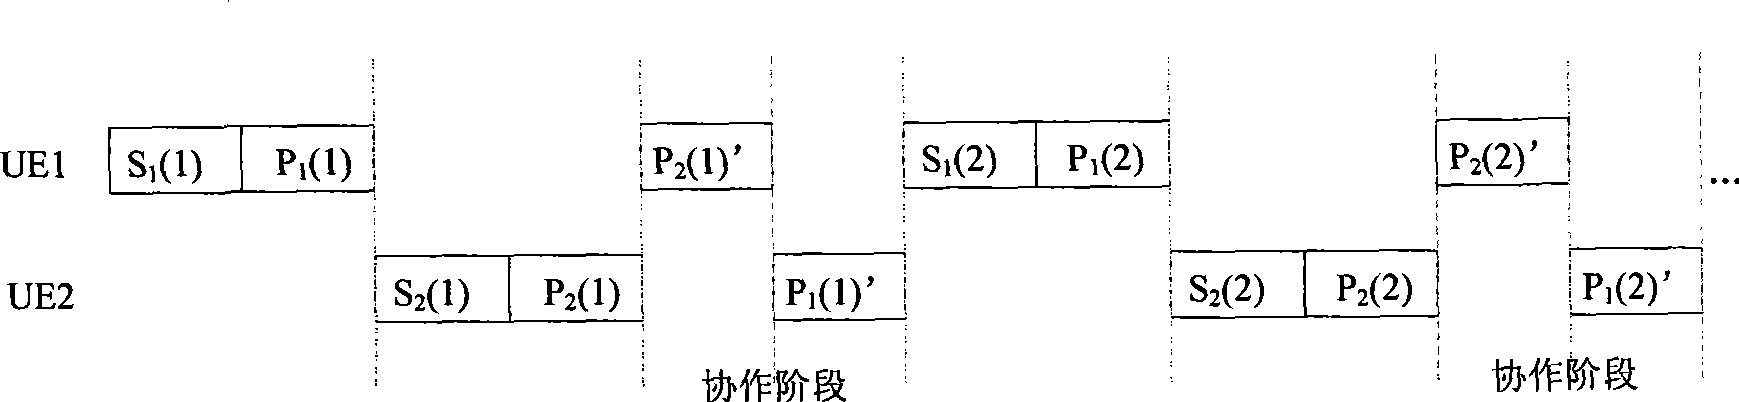 User collaboration method with joint network coding and channel coding